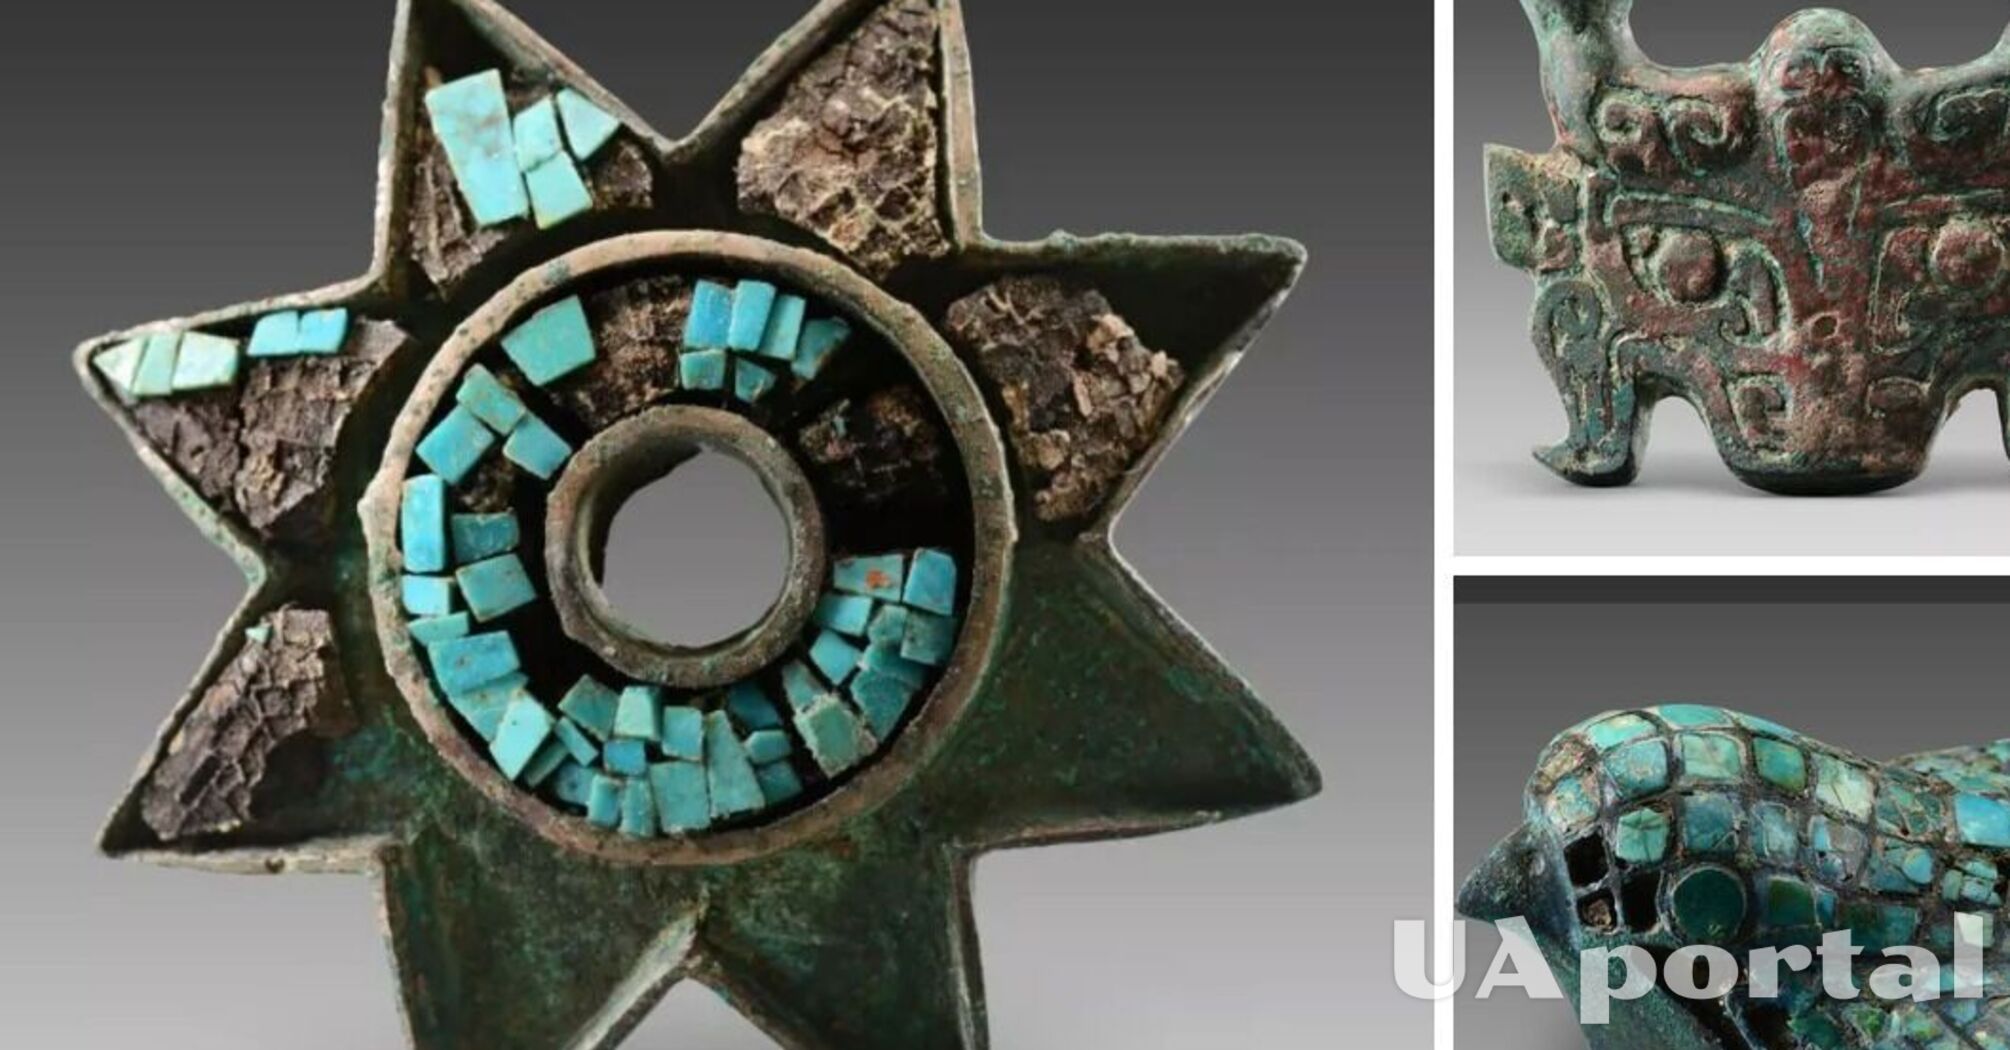 Bronze Age artifacts and 'elite tombs' found in northern China (photo)